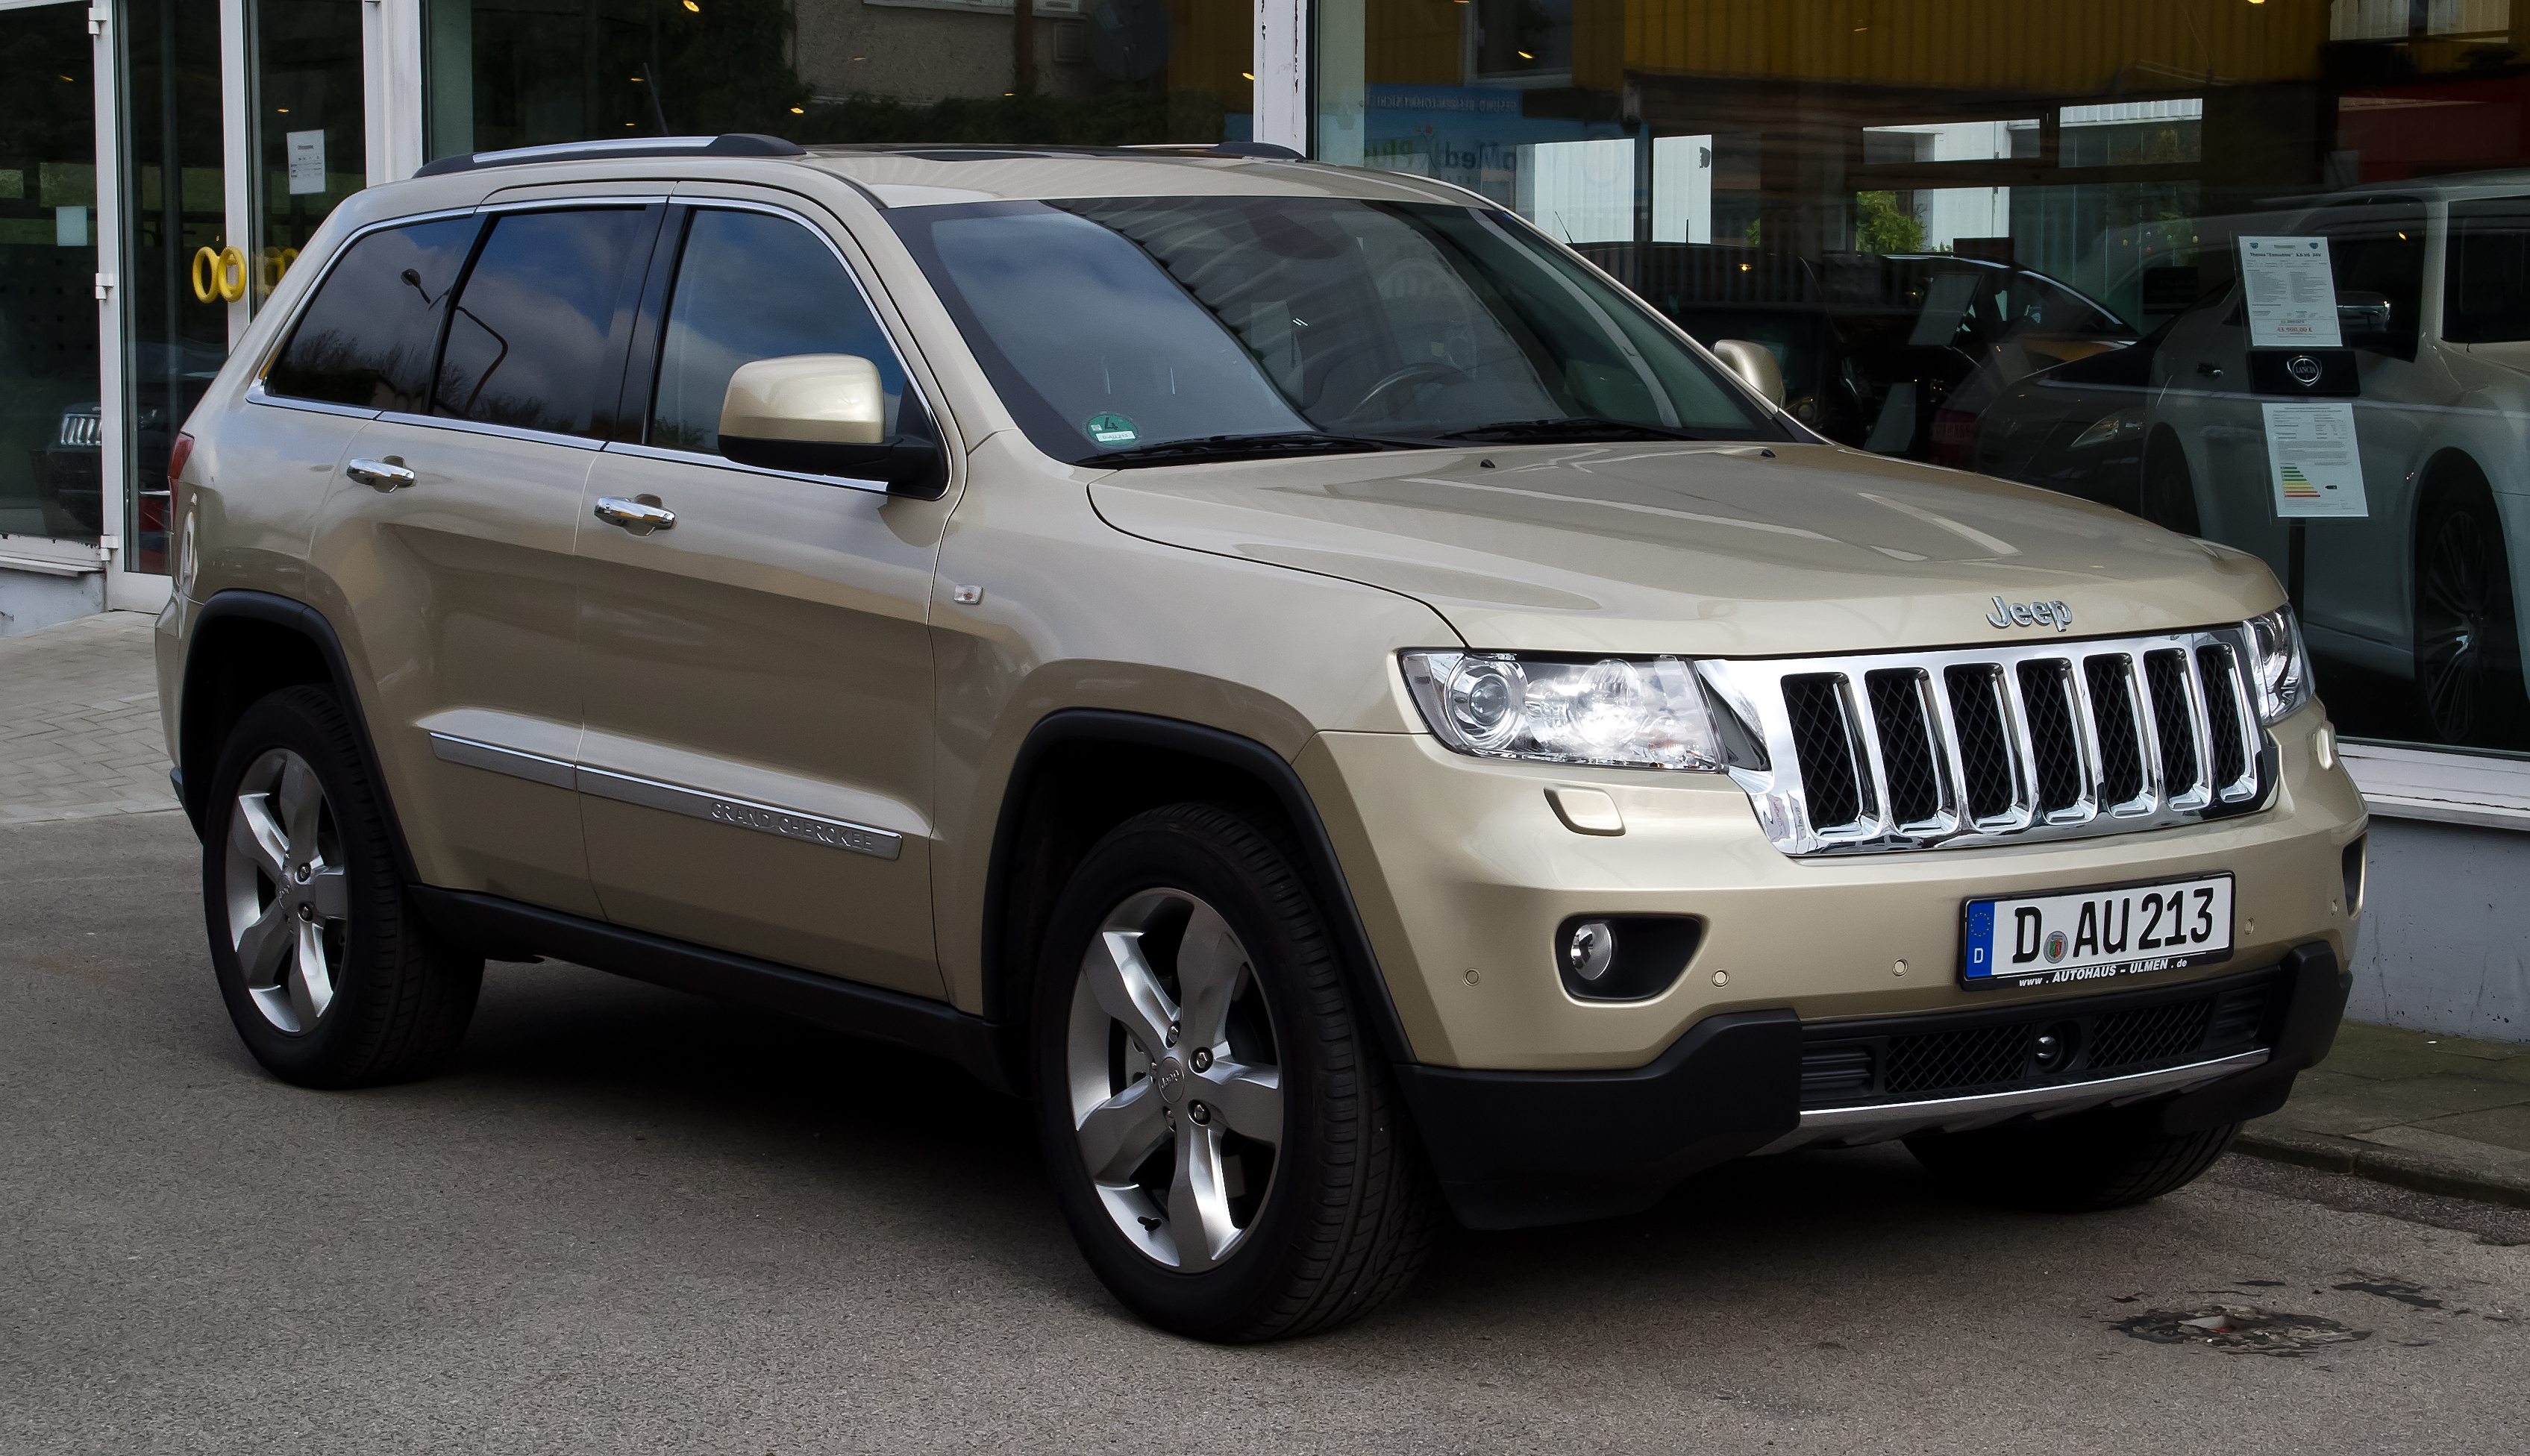 Jeep Grand Cherokee CRD technical details, history, photos